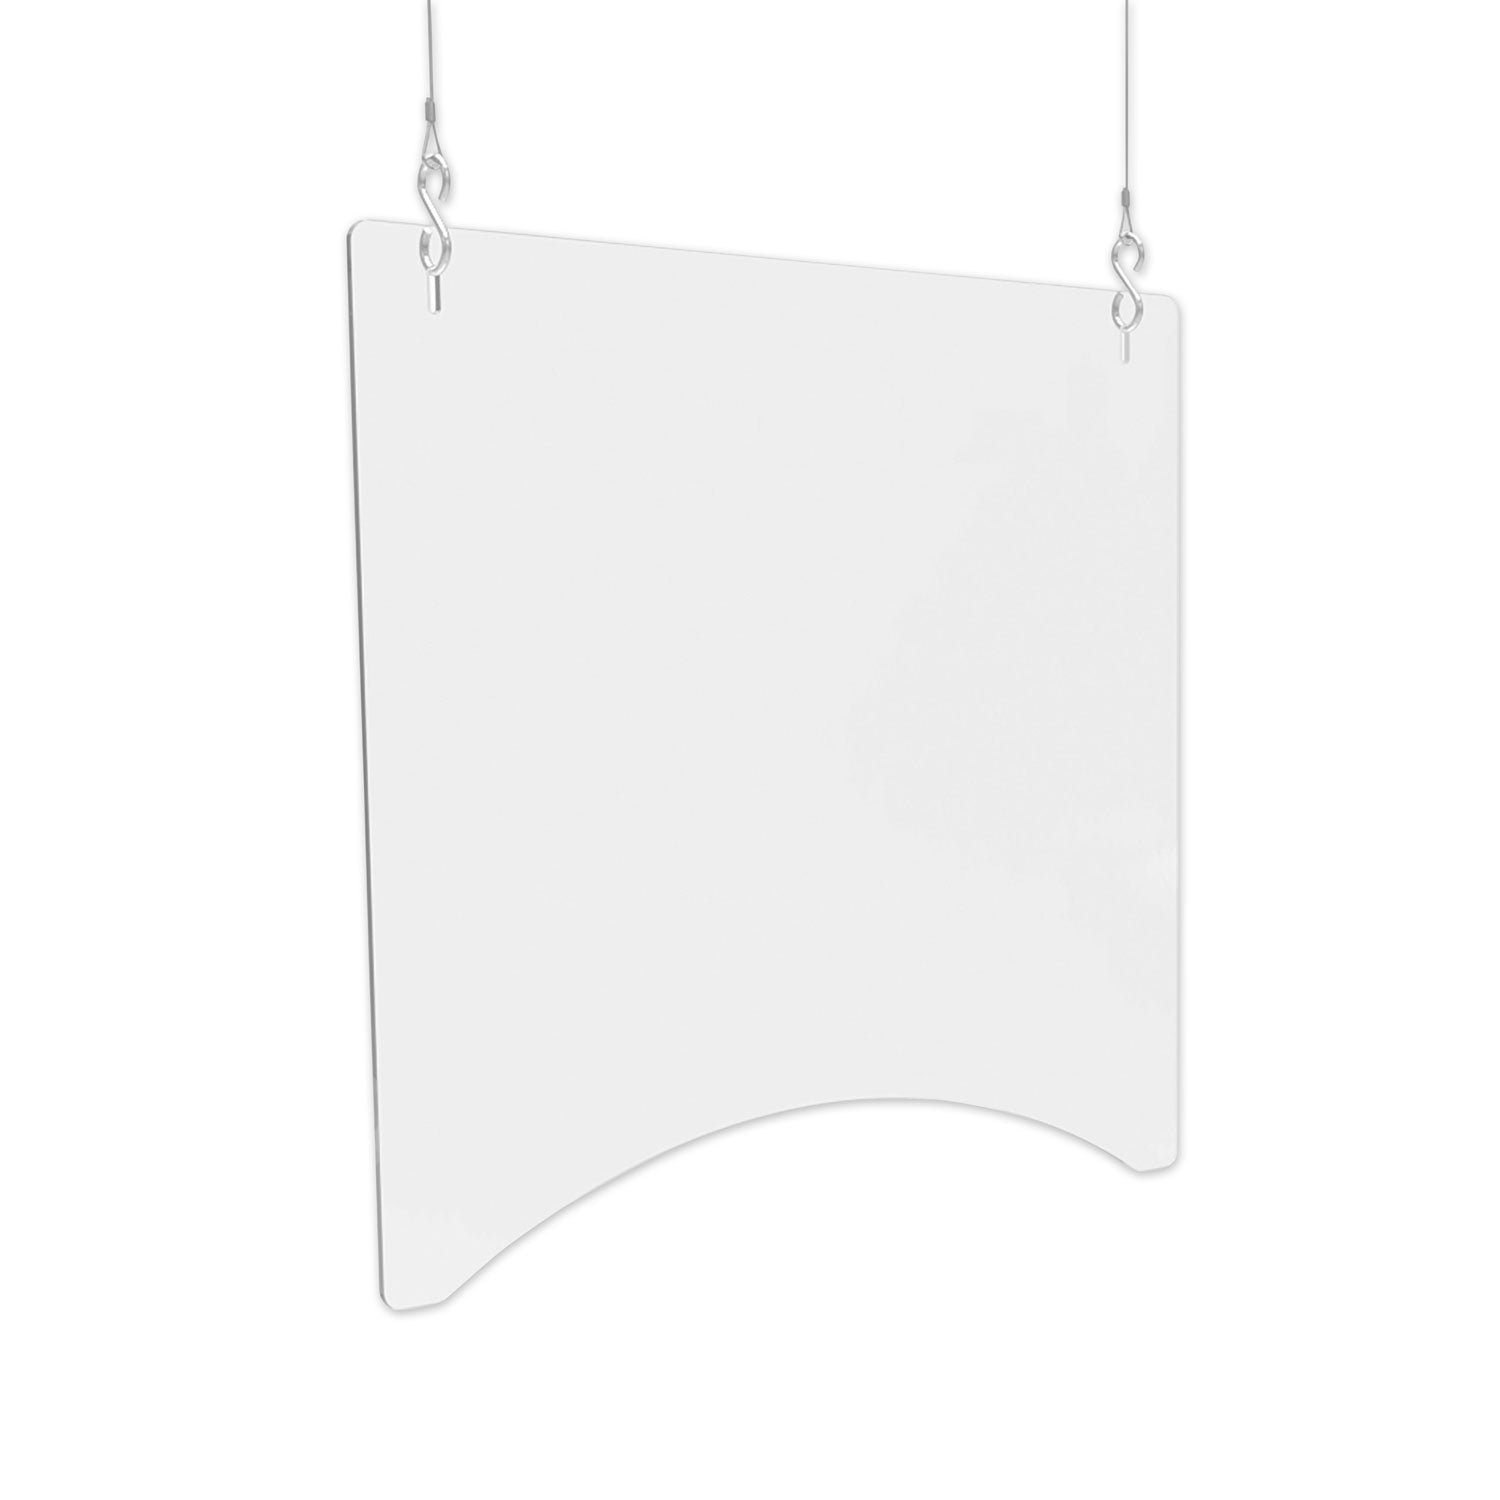 hanging-barrier-2375-x-2375-acrylic-clear-2-carton_defpbcha2424 - 1